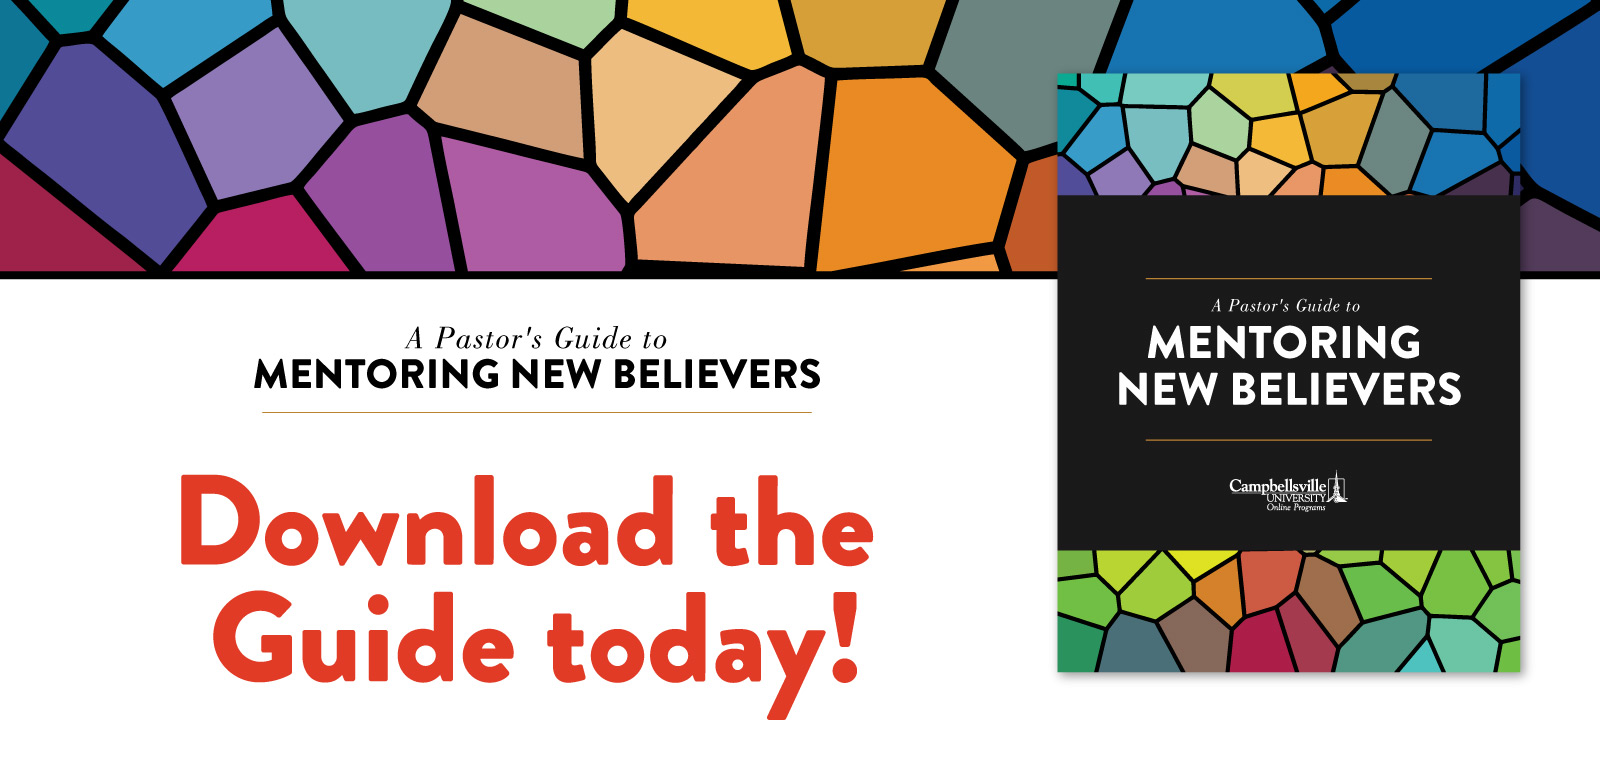 A Pastor's Guide to Mentoring New Believers - Download the Guide today!